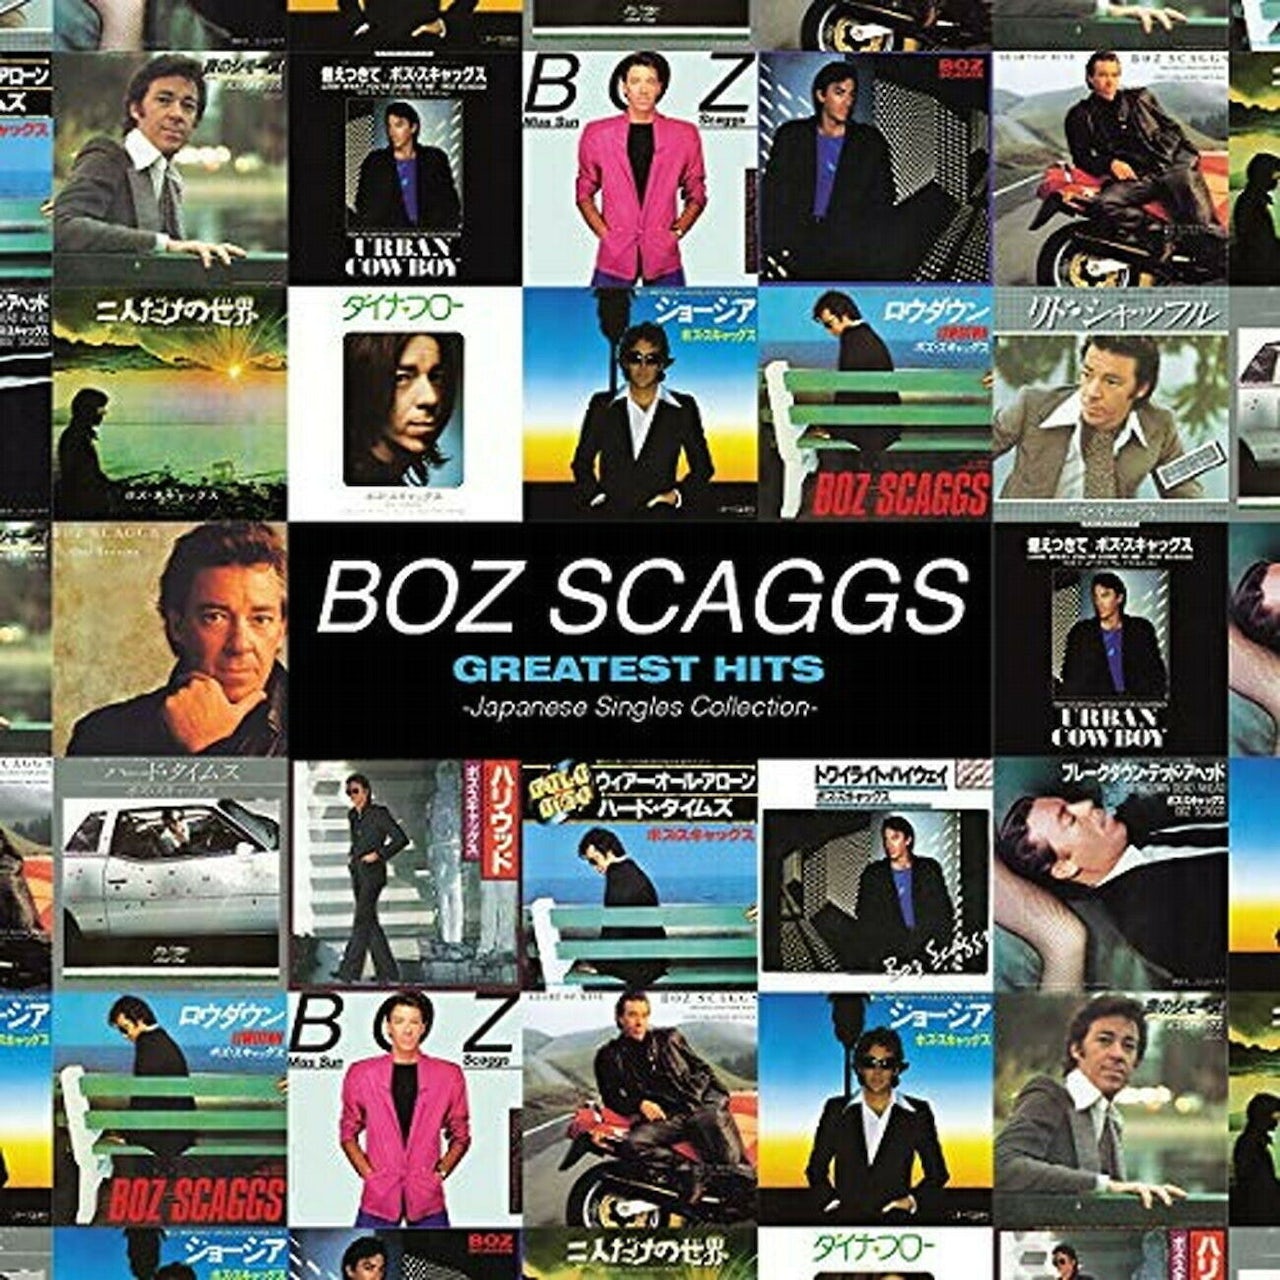 Boz Scaggs: Greatest Hits Japanese Singles Collection CD &amp; DVD